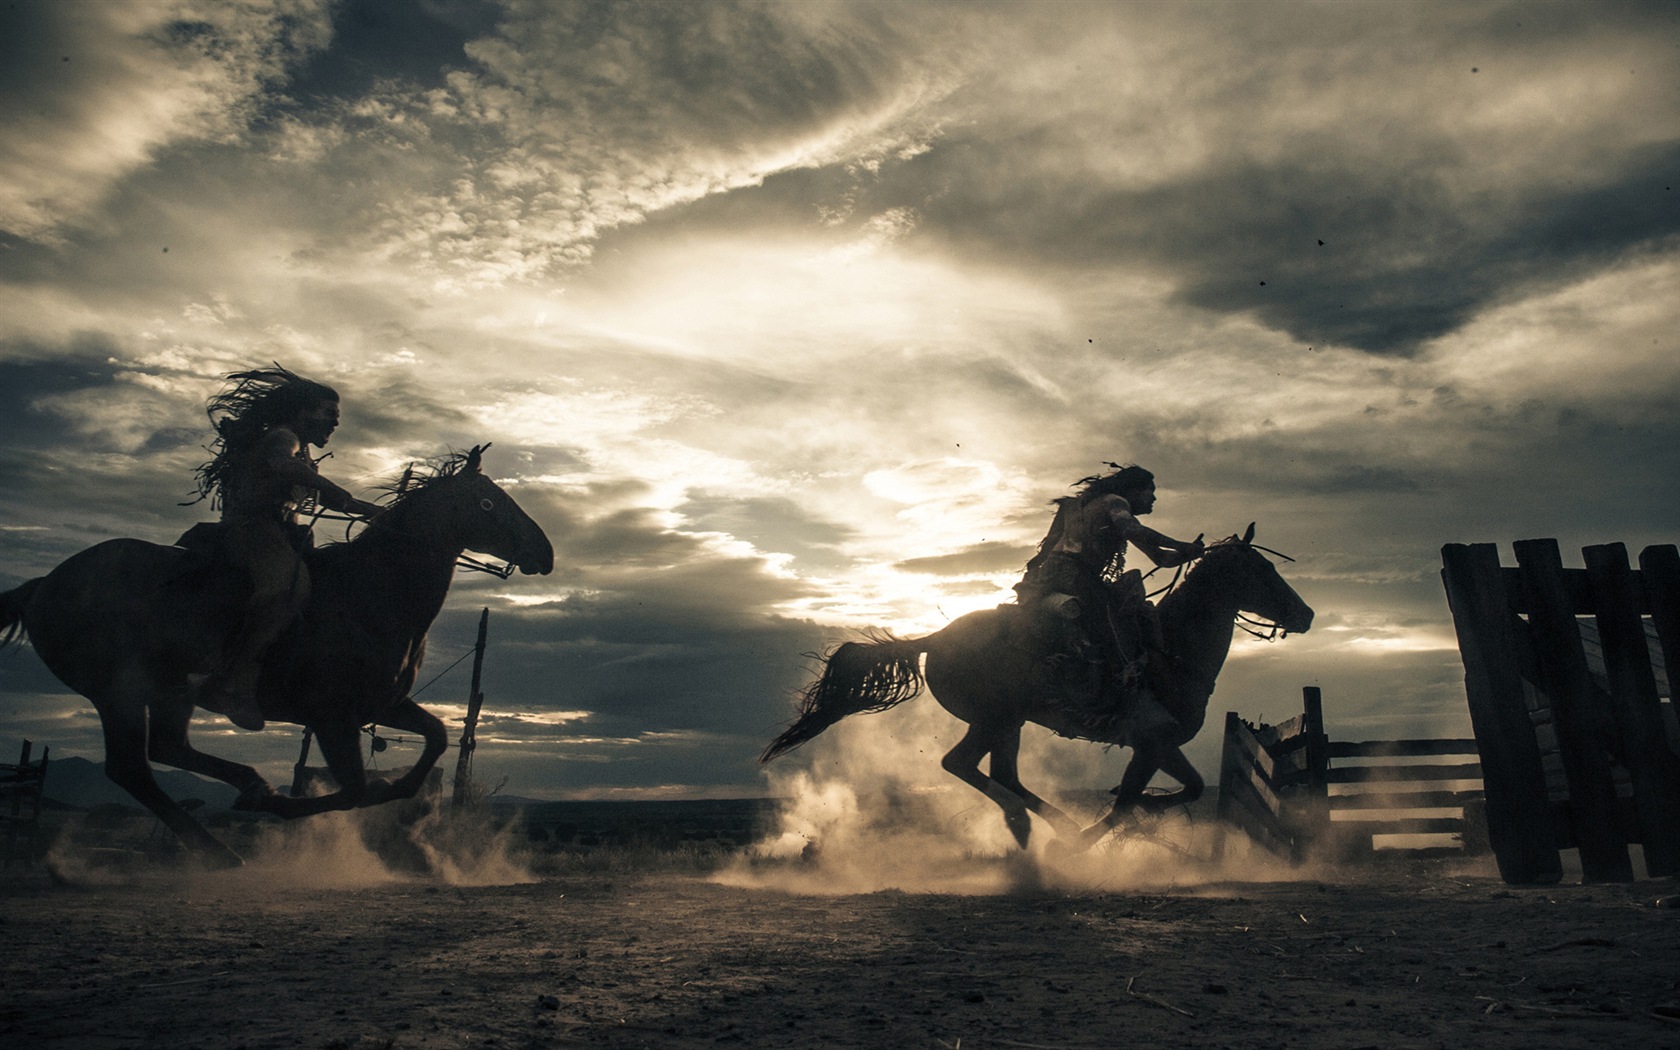 The Lone Ranger HD movie wallpapers #3 - 1680x1050